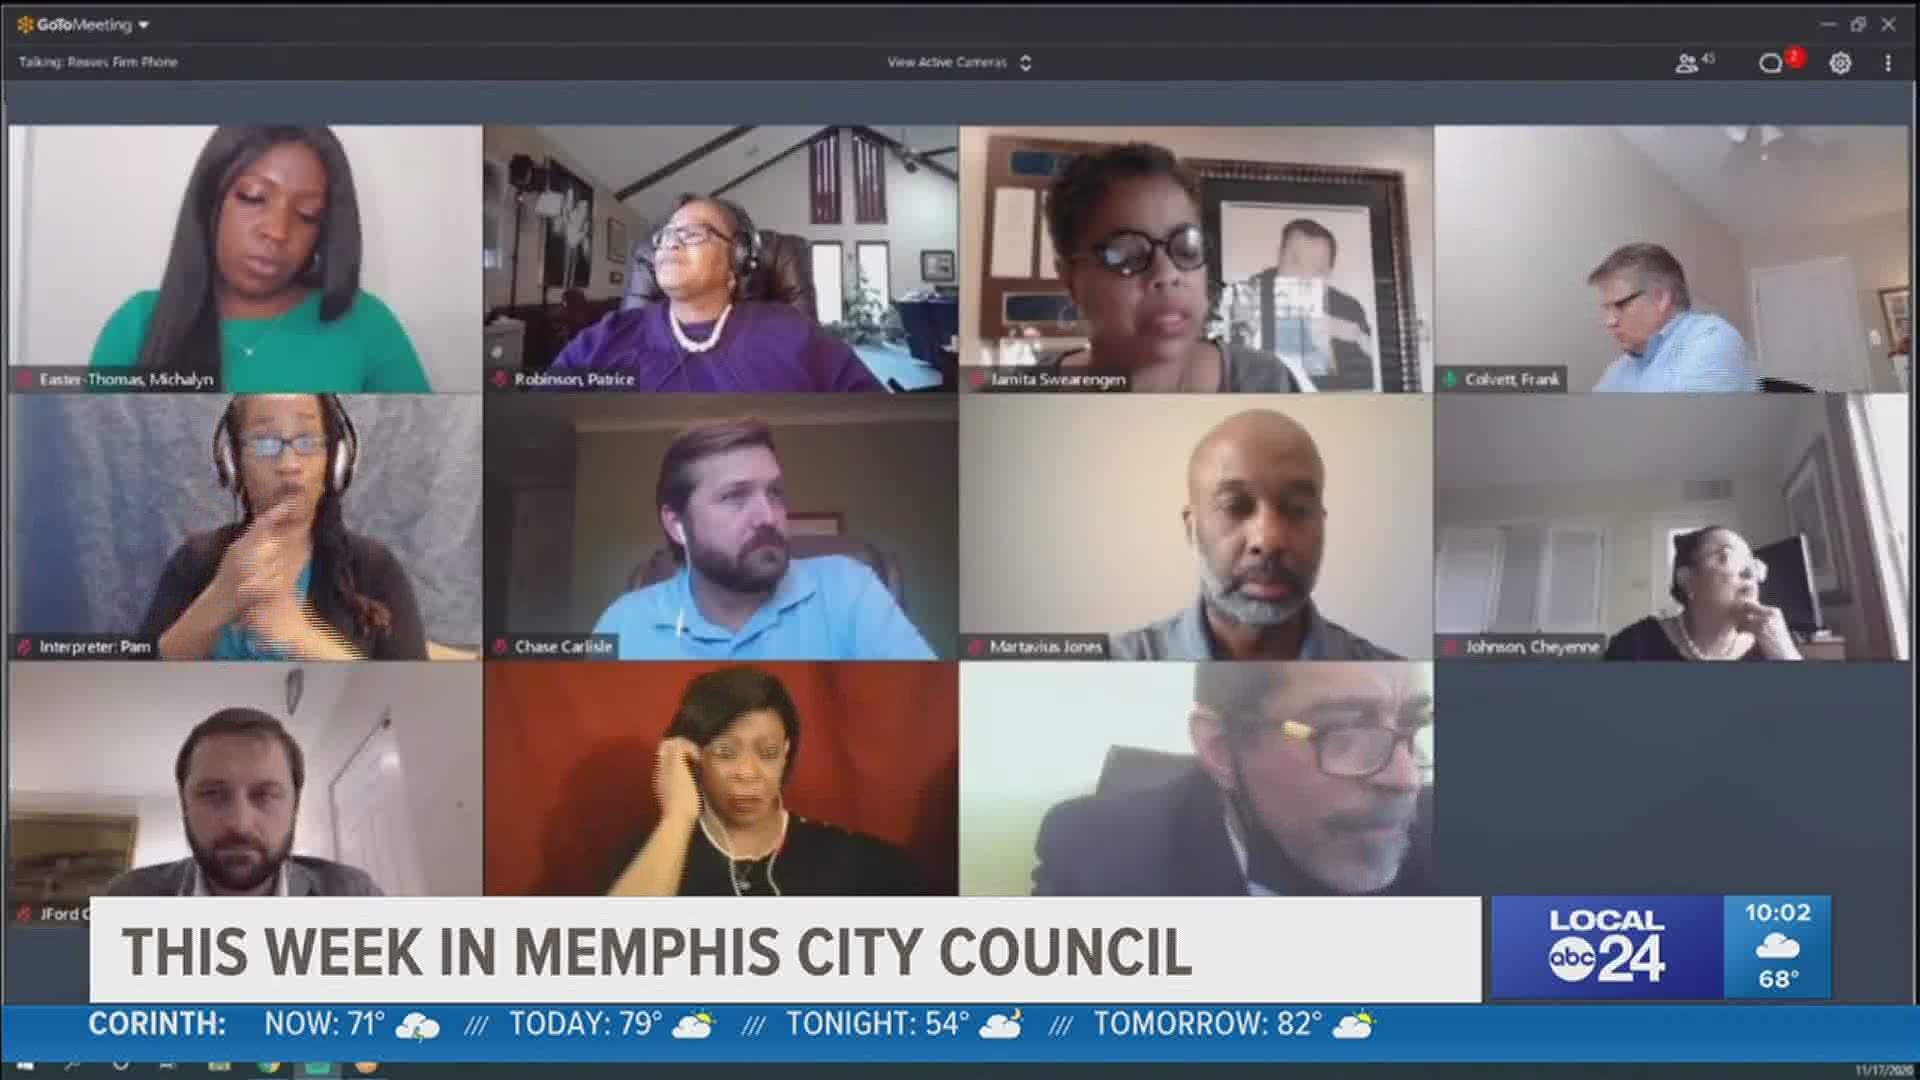 Memphis city council vote on several topics this upcoming week